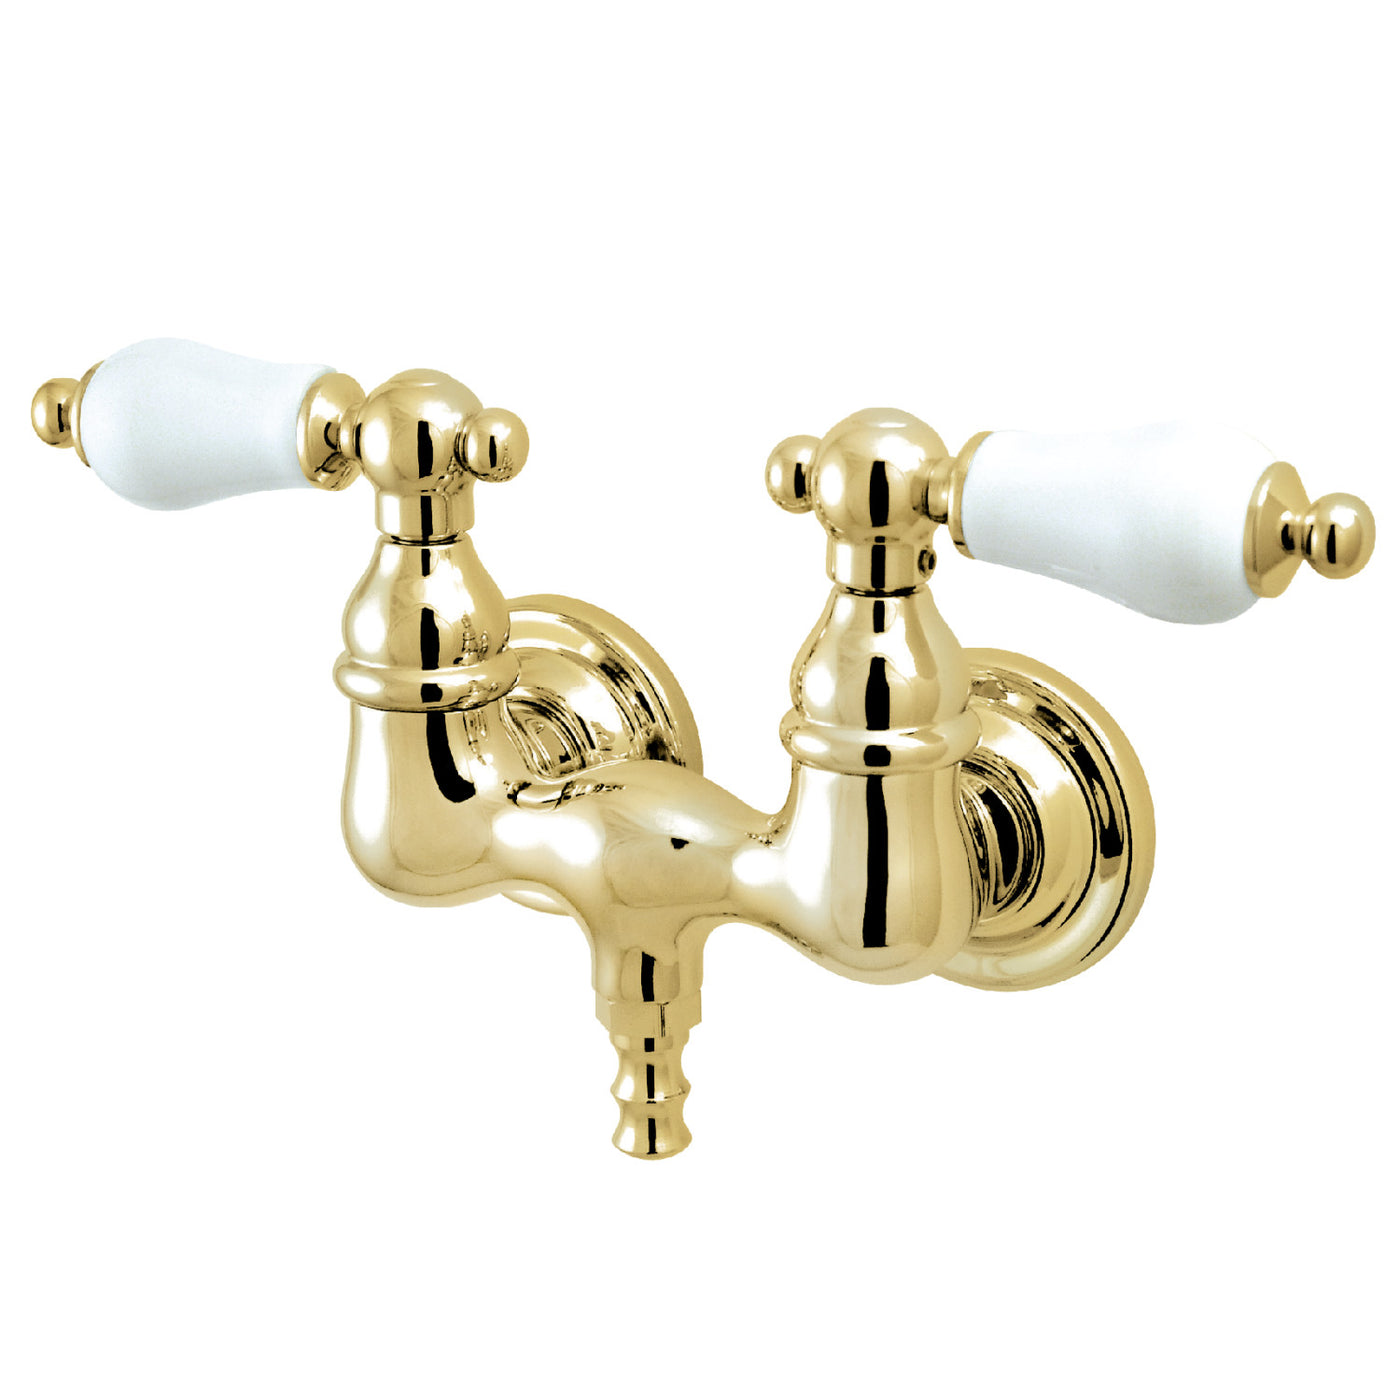 Elements of Design DT0312CL 3-3/8-Inch Wall Mount Tub Faucet, Polished Brass